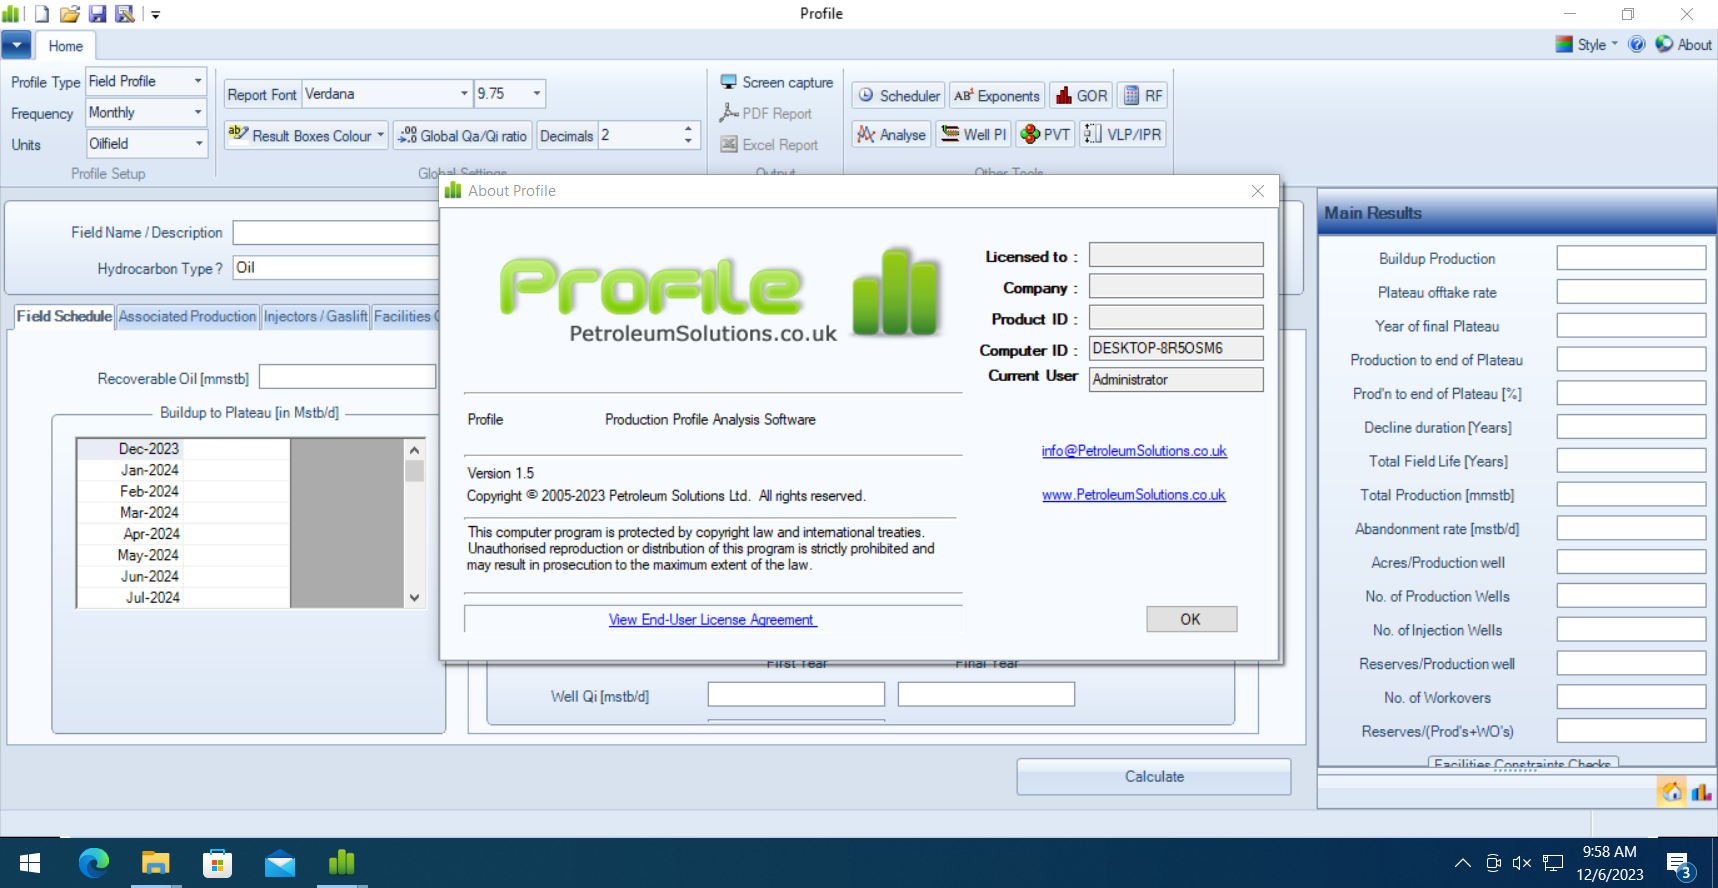 Working with Petroleum Solutions PDProfile 2023 v1.5 full license